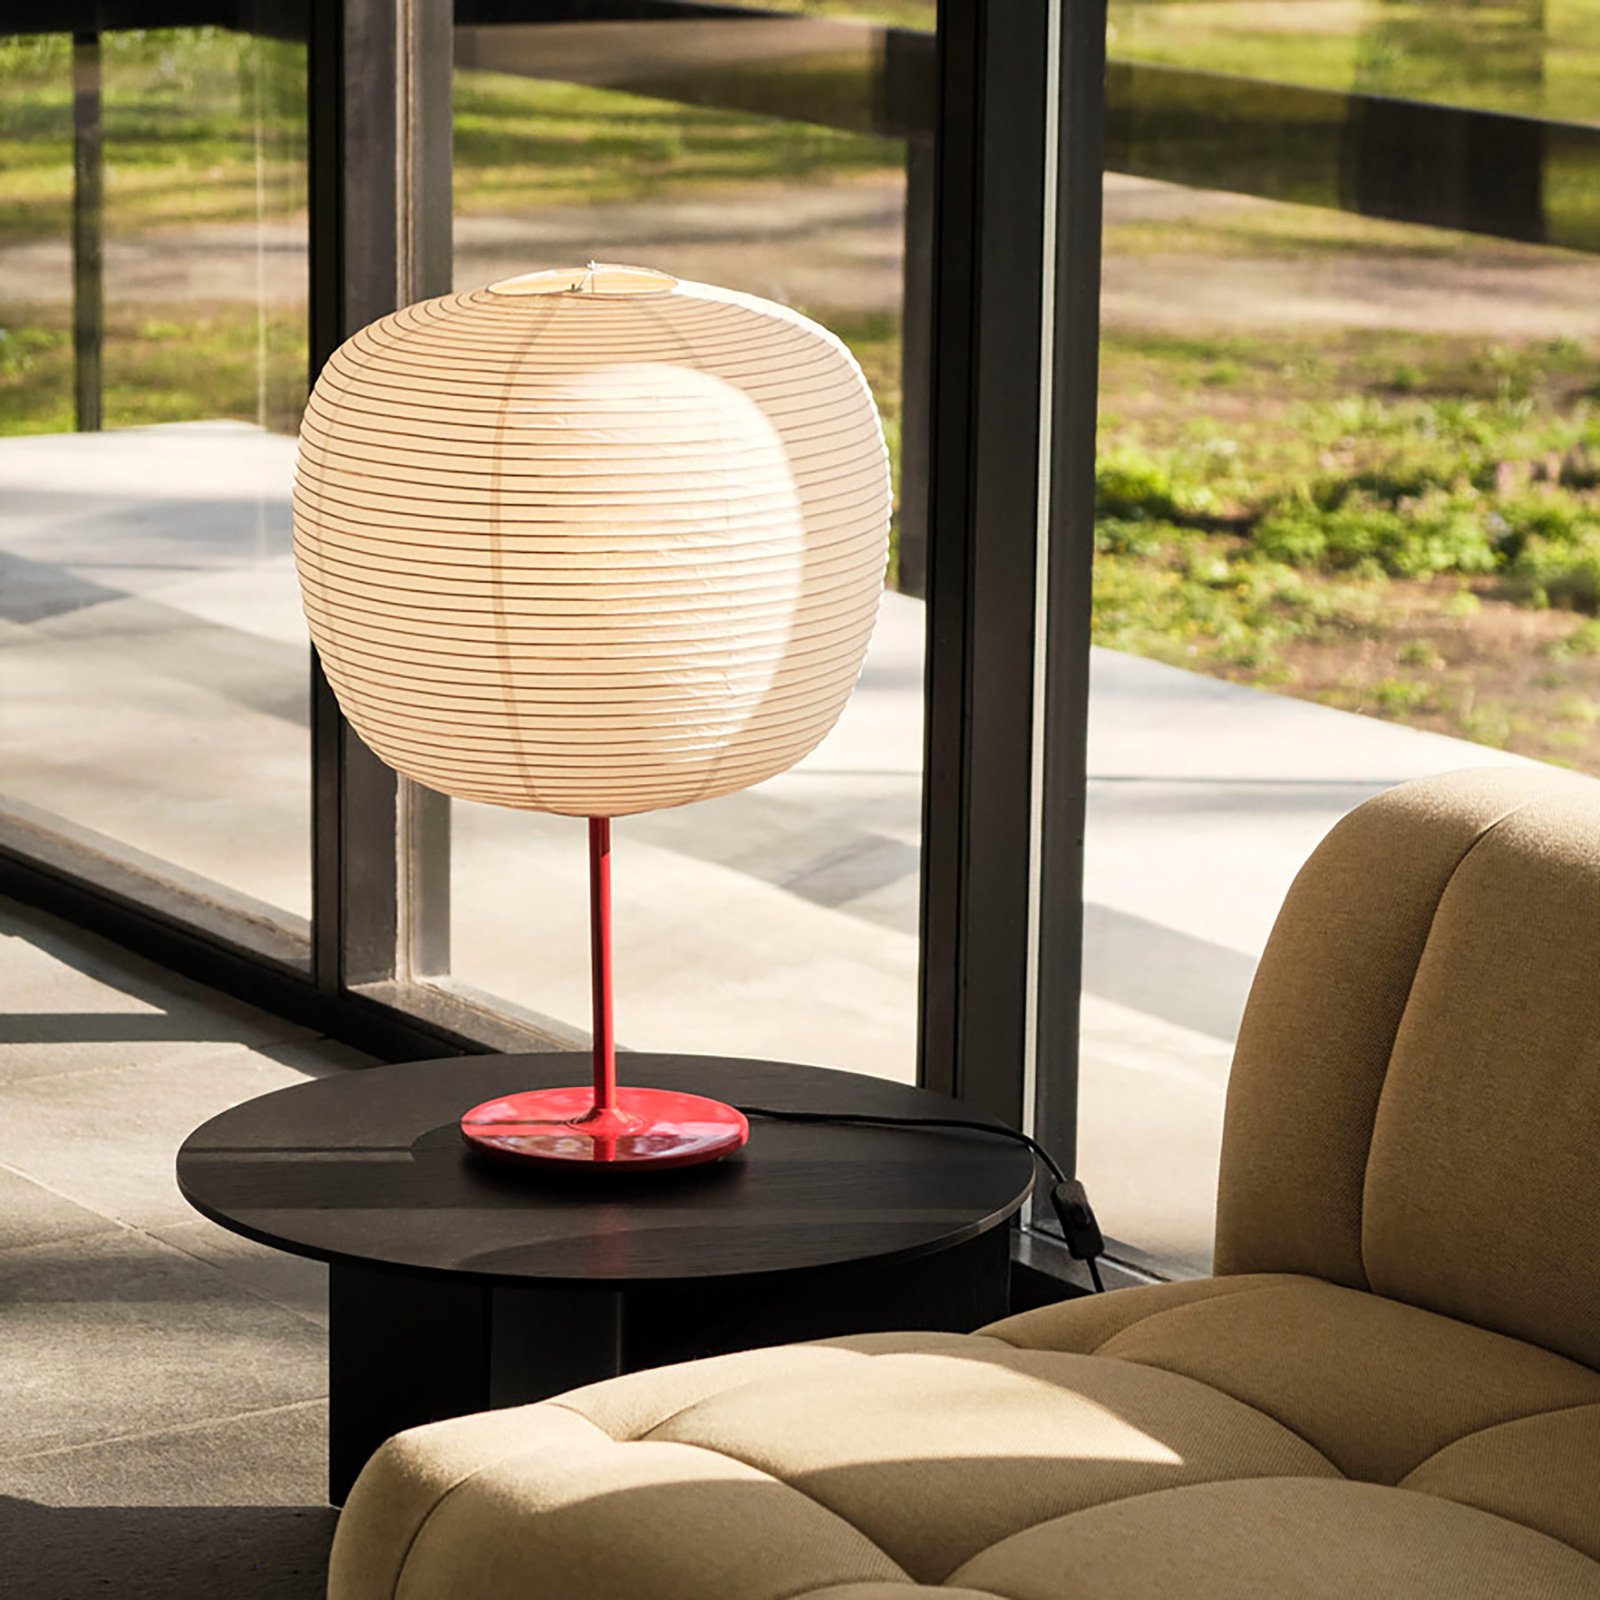 HAY Common Table, Peach lampshade, signal red base